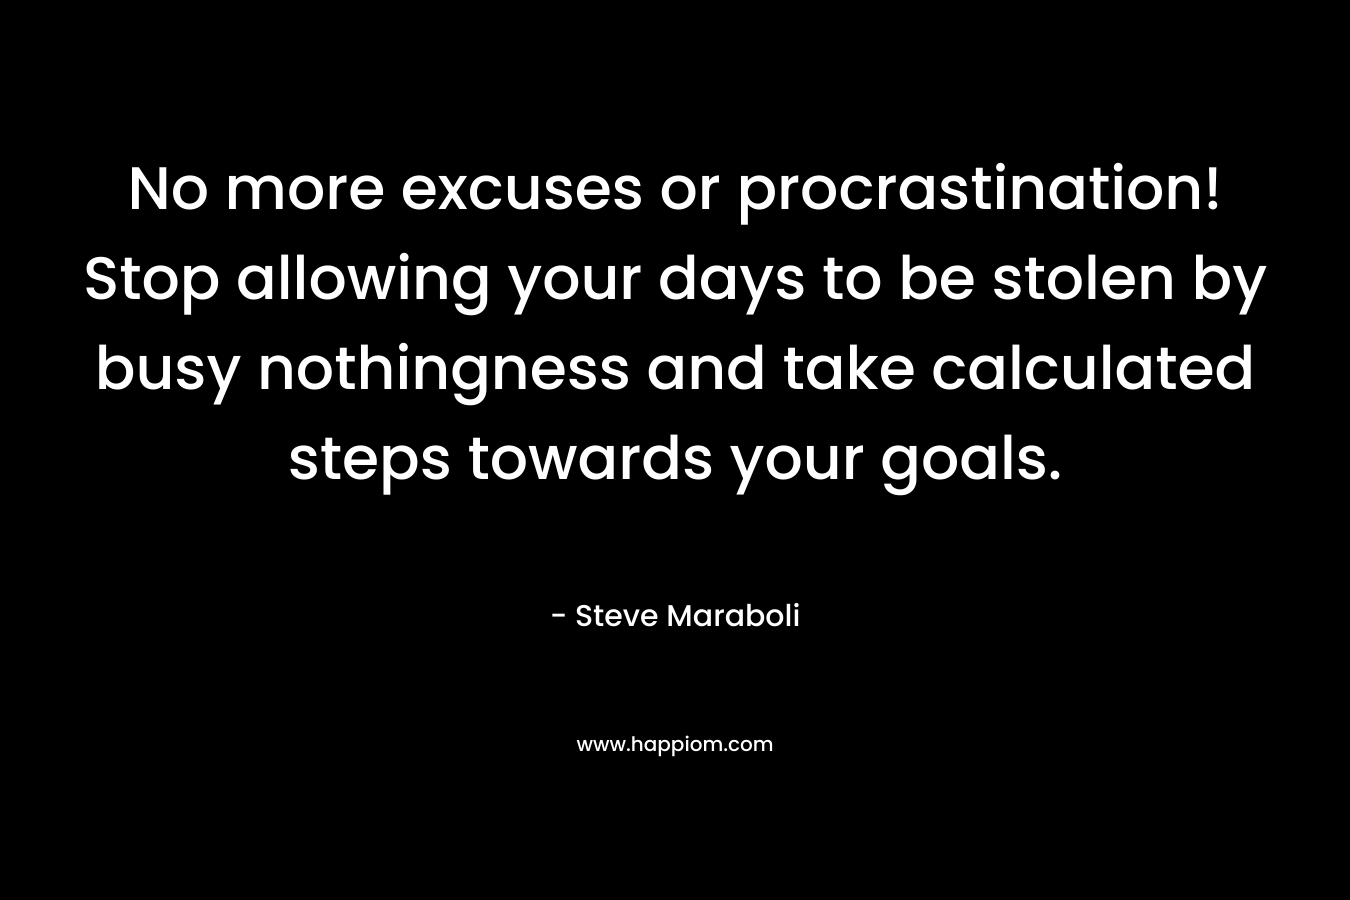 No more excuses or procrastination! Stop allowing your days to be stolen by busy nothingness and take calculated steps towards your goals.